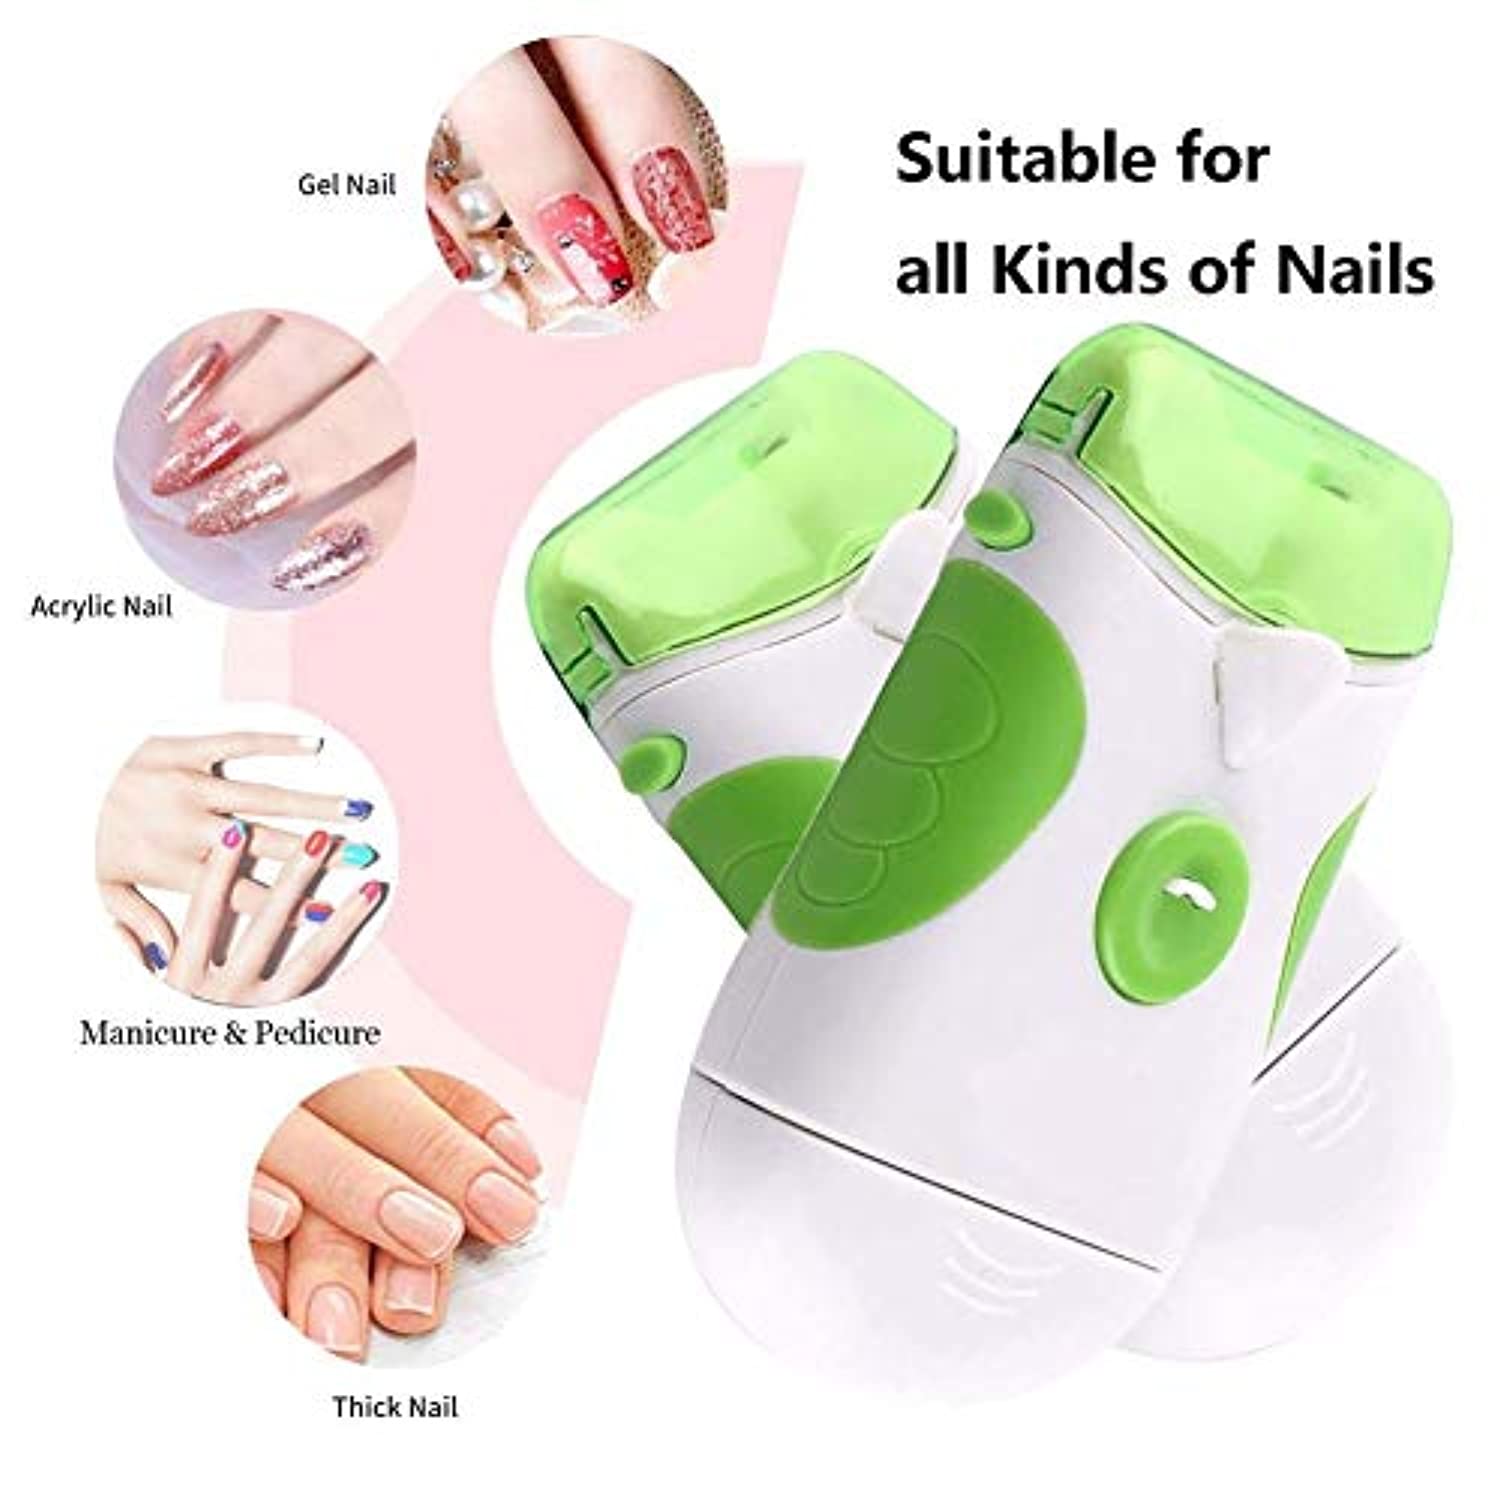 Dysel Electric Nail Cutter and Filer, Electric Nail Clippers for Elderly Thick Nail Toenails, Adults Electronic Manicure Pedicure Tool Effective Effortless Portable 2 in 1 for Home Salon2pcs